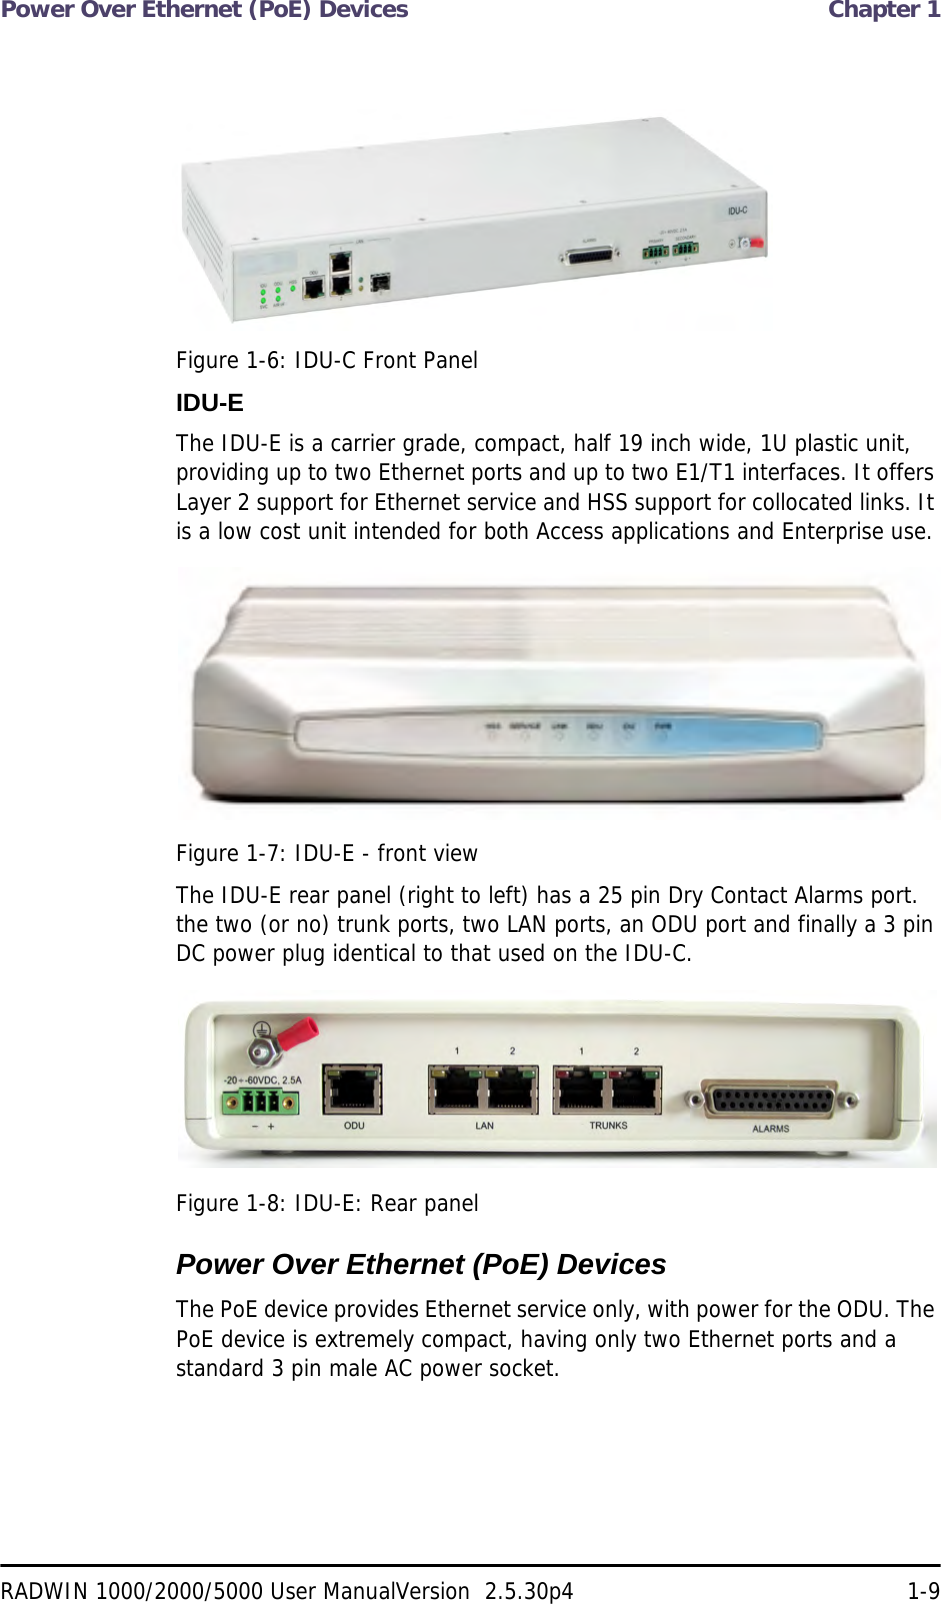 Power Over Ethernet (PoE) Devices  Chapter 1RADWIN 1000/2000/5000 User ManualVersion  2.5.30p4 1-9Figure 1-6: IDU-C Front PanelIDU-EThe IDU-E is a carrier grade, compact, half 19 inch wide, 1U plastic unit, providing up to two Ethernet ports and up to two E1/T1 interfaces. It offers Layer 2 support for Ethernet service and HSS support for collocated links. It is a low cost unit intended for both Access applications and Enterprise use.Figure 1-7: IDU-E - front viewThe IDU-E rear panel (right to left) has a 25 pin Dry Contact Alarms port. the two (or no) trunk ports, two LAN ports, an ODU port and finally a 3 pin DC power plug identical to that used on the IDU-C.Figure 1-8: IDU-E: Rear panelPower Over Ethernet (PoE) DevicesThe PoE device provides Ethernet service only, with power for the ODU. The PoE device is extremely compact, having only two Ethernet ports and a standard 3 pin male AC power socket.